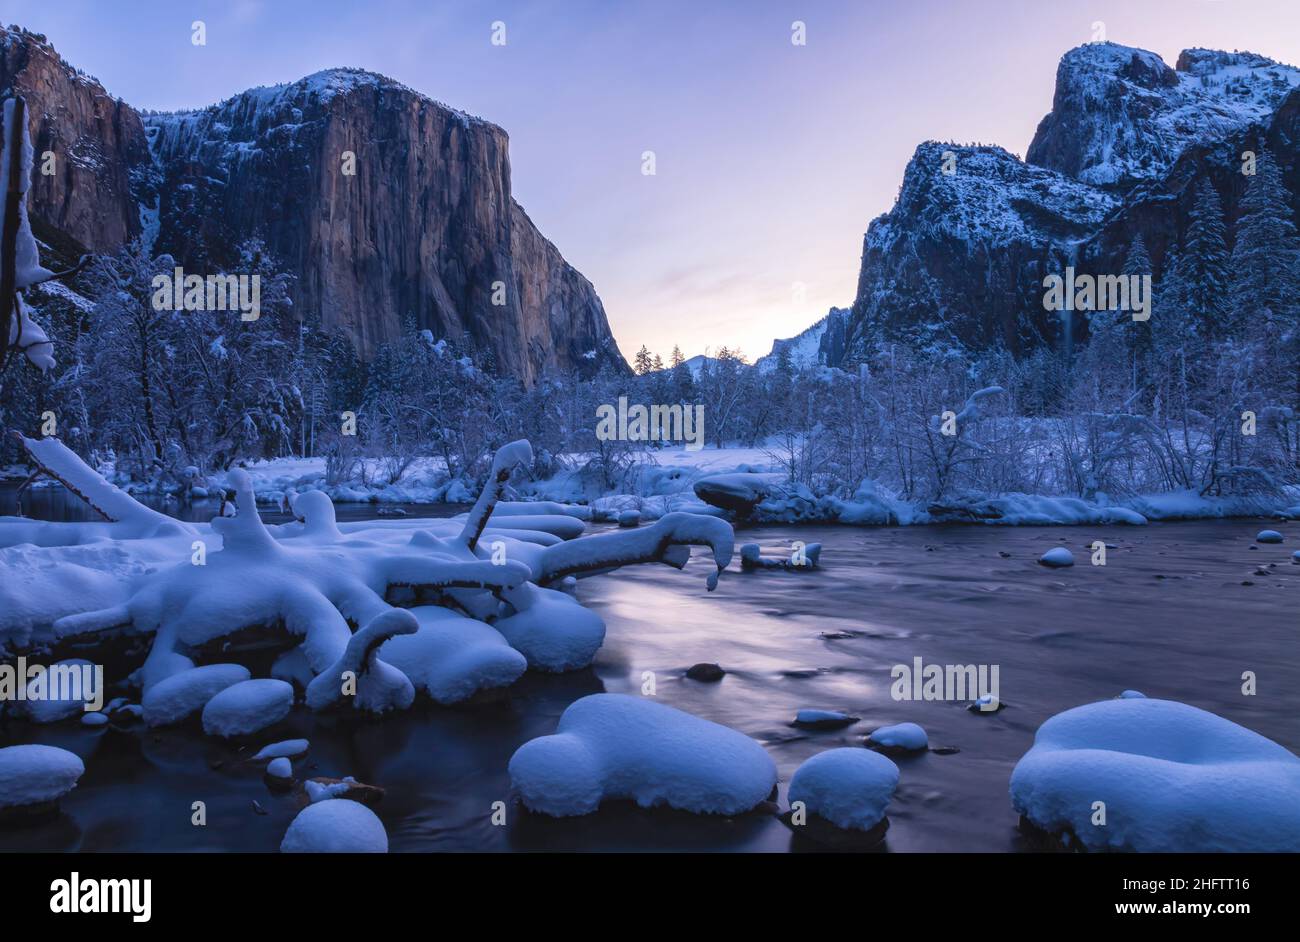 Iconic view of Yosemite Valley by the Merced River in winter, Yosemite National Park, California, USA, at early dawn. Stock Photo